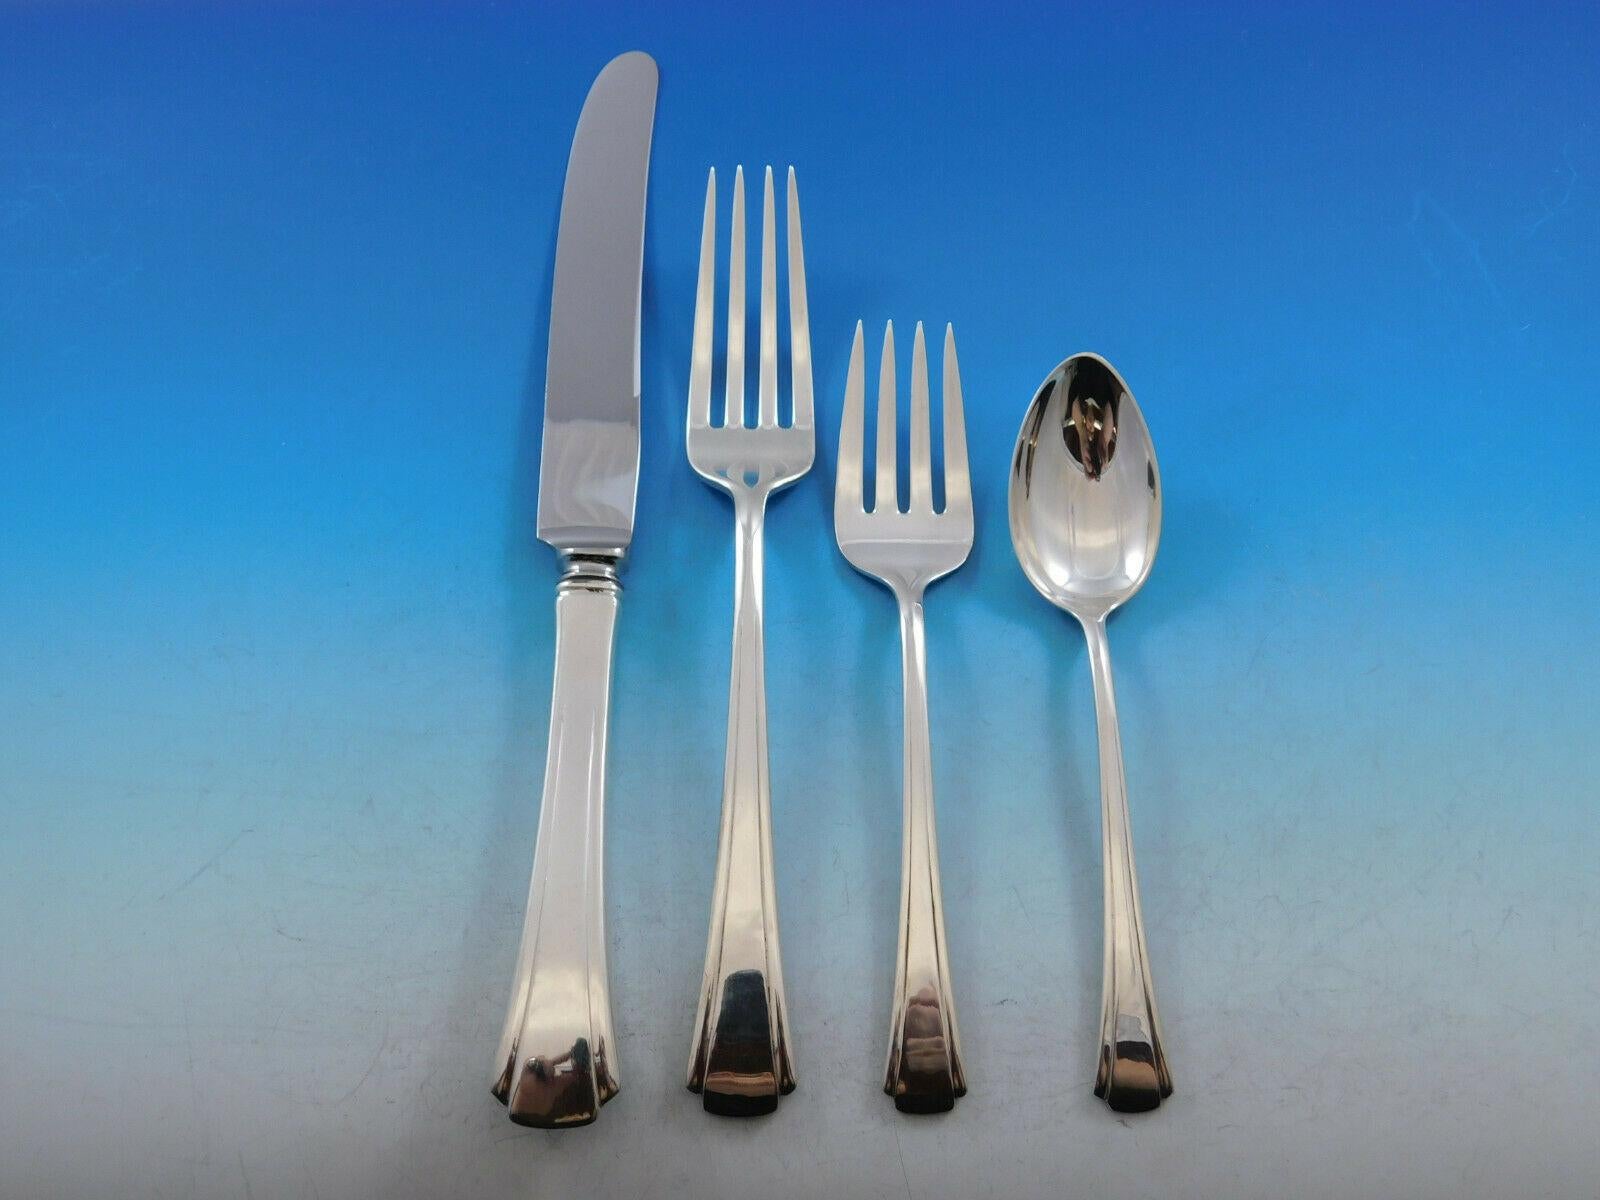 Monumental dinner size debutante by Richard Dimes sterling silver flatware set - 147 pieces. This set includes:

12 dinner size knives, 9 7/8